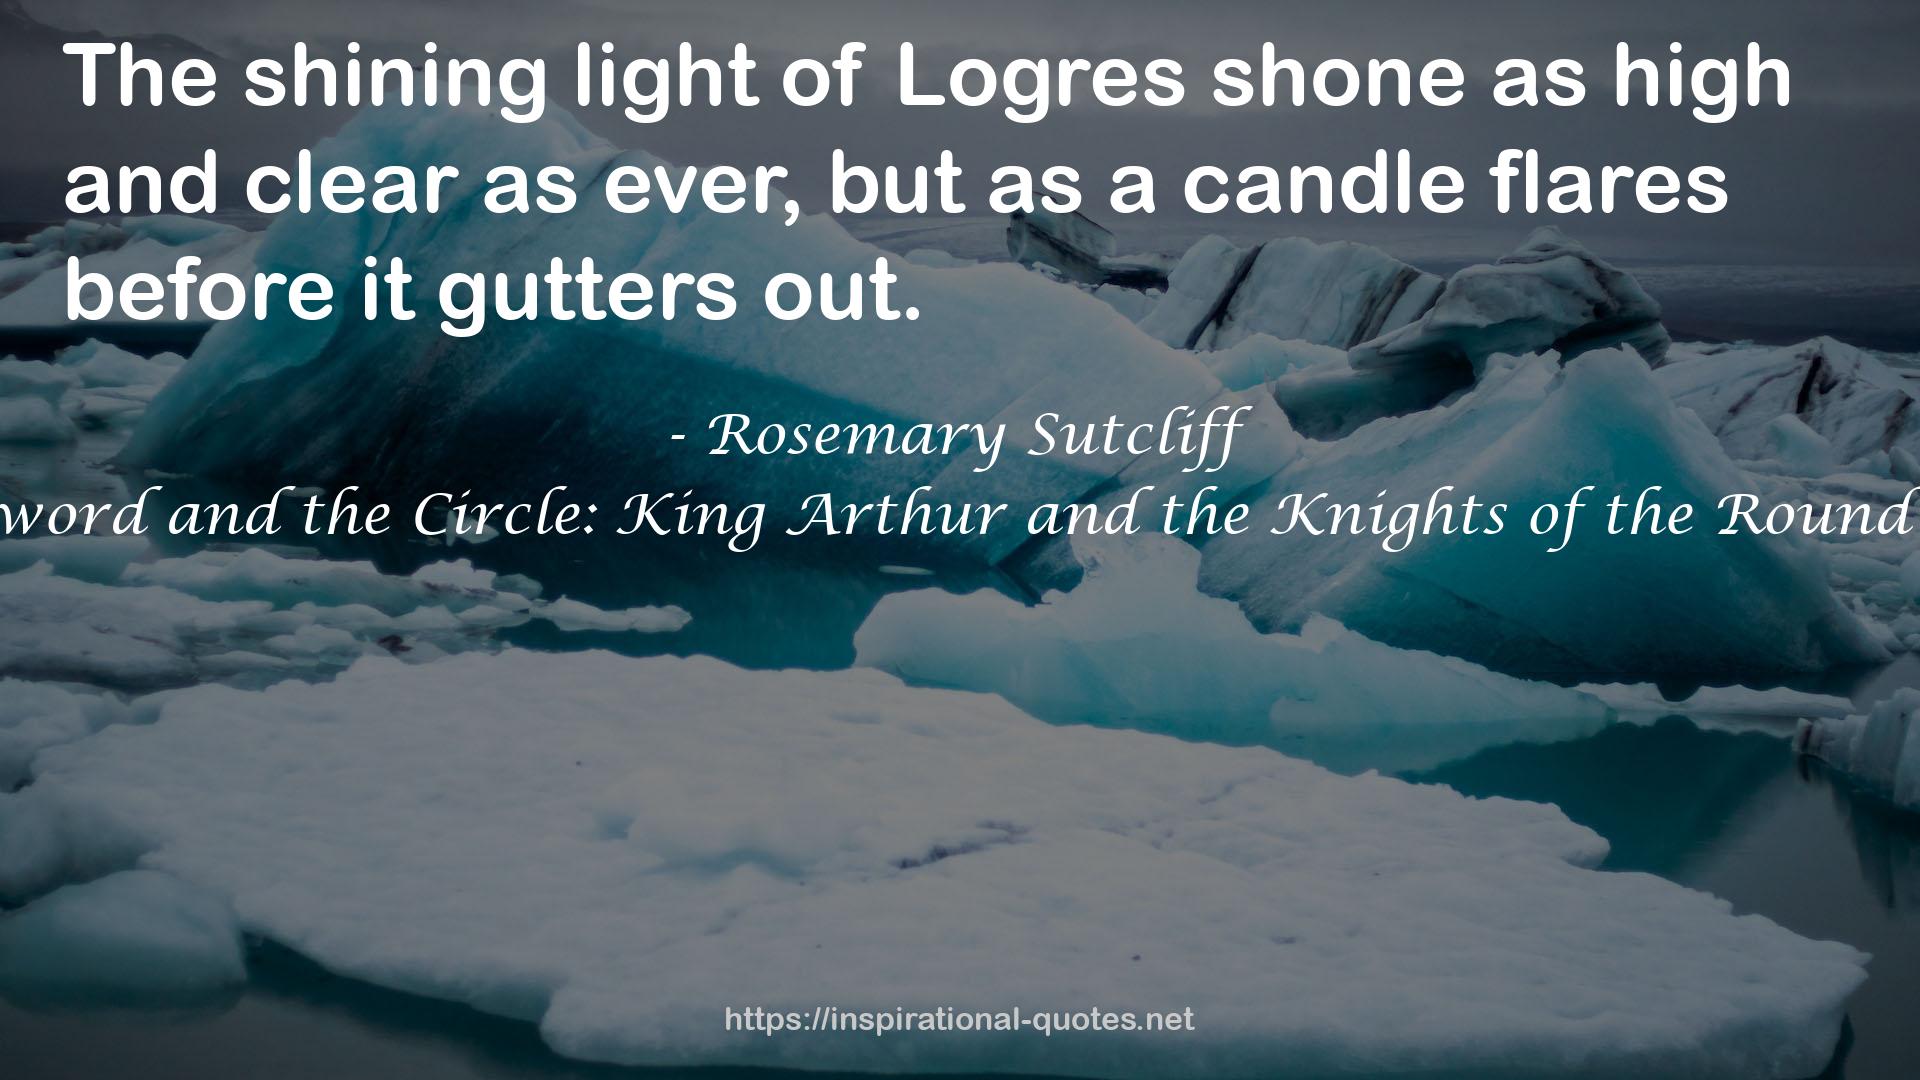 The Sword and the Circle: King Arthur and the Knights of the Round Table QUOTES